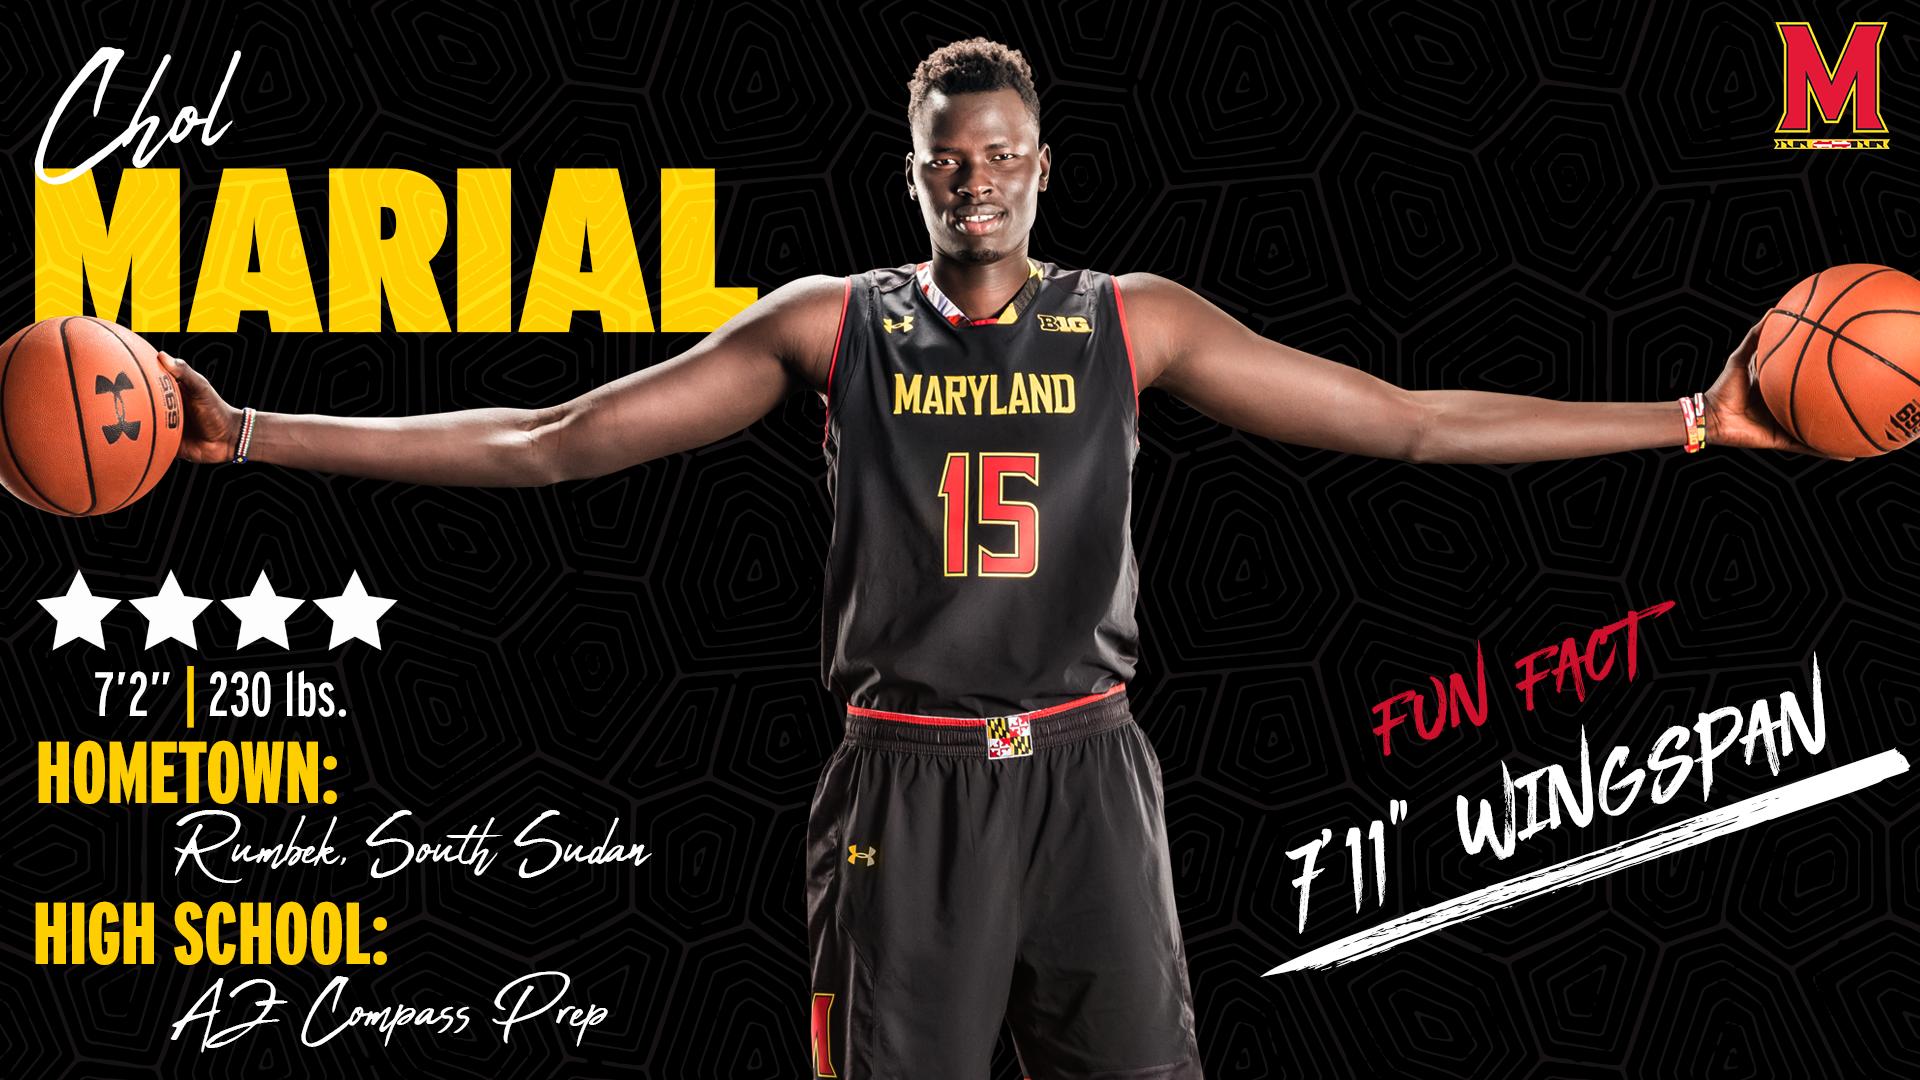 Chol Marial Adds Depth To Maryland 2019 Class